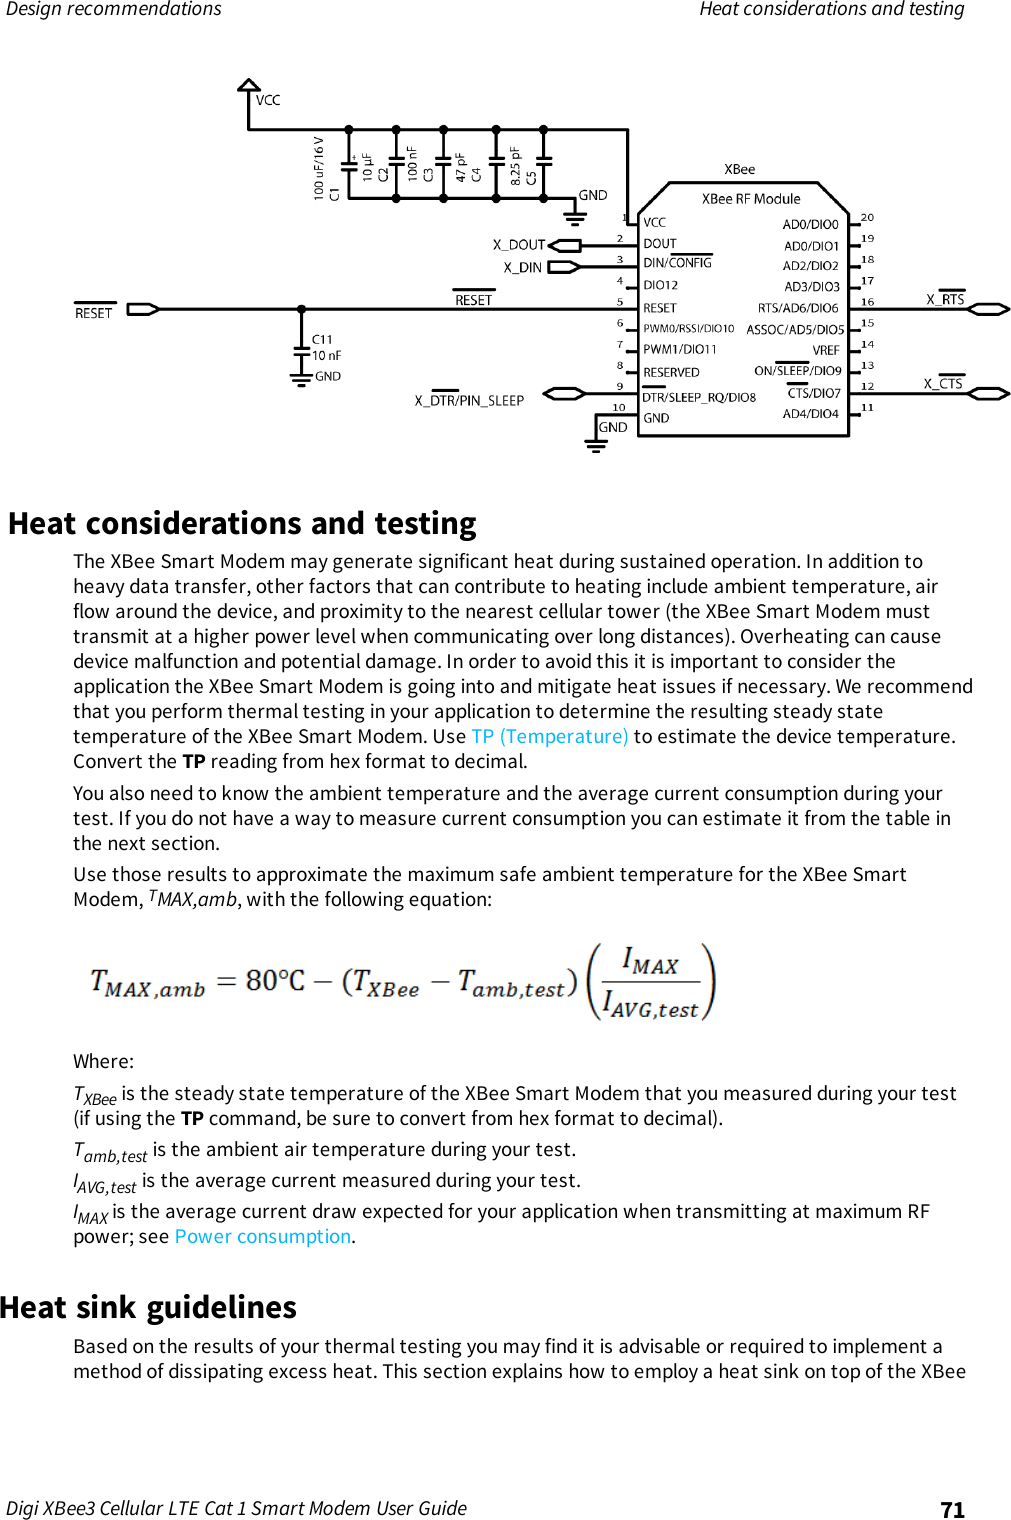 Design recommendations Heat considerations and testingDigi XBee3 Cellular LTE Cat 1 Smart Modem User Guide 71Heat considerations and testingThe XBee Smart Modem may generate significant heat during sustained operation. In addition toheavy data transfer, other factors that can contribute to heating include ambient temperature, airflow around the device, and proximity to the nearest cellular tower (the XBee Smart Modem musttransmit at a higher power level when communicating over long distances). Overheating can causedevice malfunction and potential damage. In order to avoid this it is important to consider theapplication the XBee Smart Modem is going into and mitigate heat issues if necessary. We recommendthat you perform thermal testing in your application to determine the resulting steady statetemperature of the XBee Smart Modem. Use TP (Temperature) to estimate the device temperature.Convert the TP reading from hex format to decimal.You also need to know the ambient temperature and the average current consumption during yourtest. If you do not have a way to measure current consumption you can estimate it from the table inthe next section.Use those results to approximate the maximum safe ambient temperature for the XBee SmartModem, TMAX,amb, with the following equation:Where:TXBee is the steady state temperature of the XBee Smart Modem that you measured during your test(if using the TP command, be sure to convert from hex format to decimal).Tamb,test is the ambient air temperature during your test.IAVG,test is the average current measured during your test.IMAX is the average current draw expected for your application when transmitting at maximum RFpower; see Power consumption.Heat sink guidelinesBased on the results of your thermal testing you may find it is advisable or required to implement amethod of dissipating excess heat. This section explains how to employ a heat sink on top of the XBee